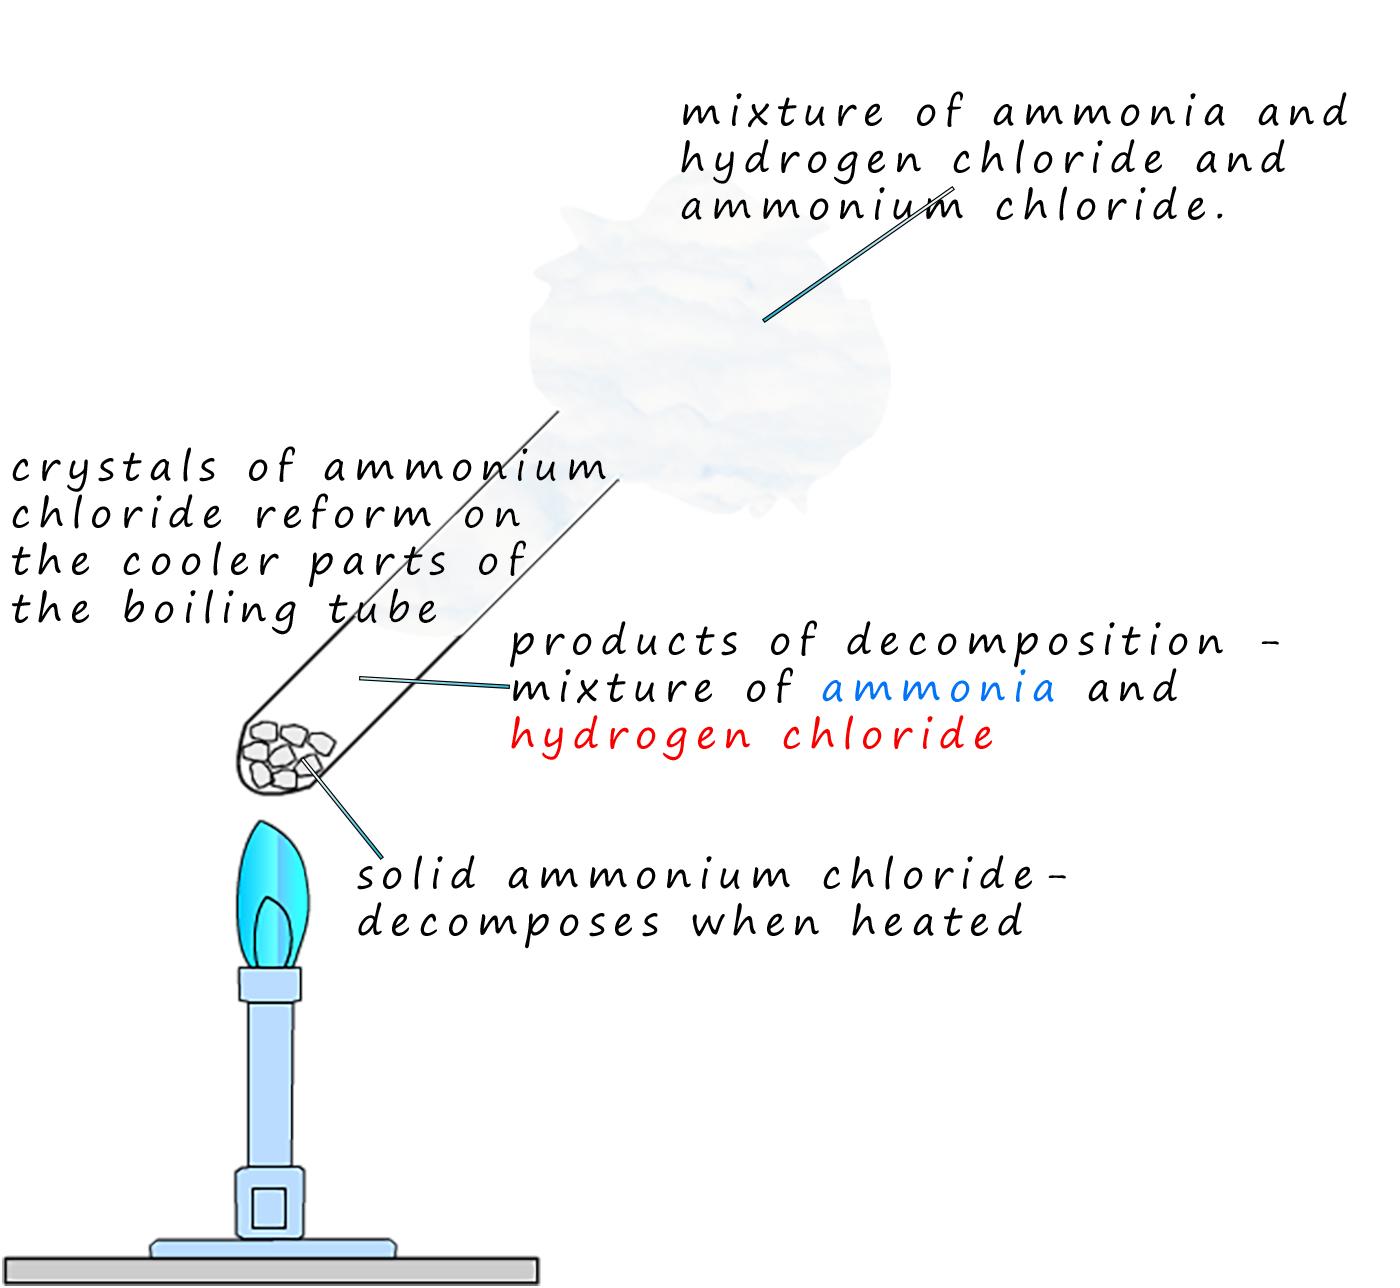 decomposition of ammnonium chloride to form ammonia and hydrogen chloride gas is an example of a reversible reaction.